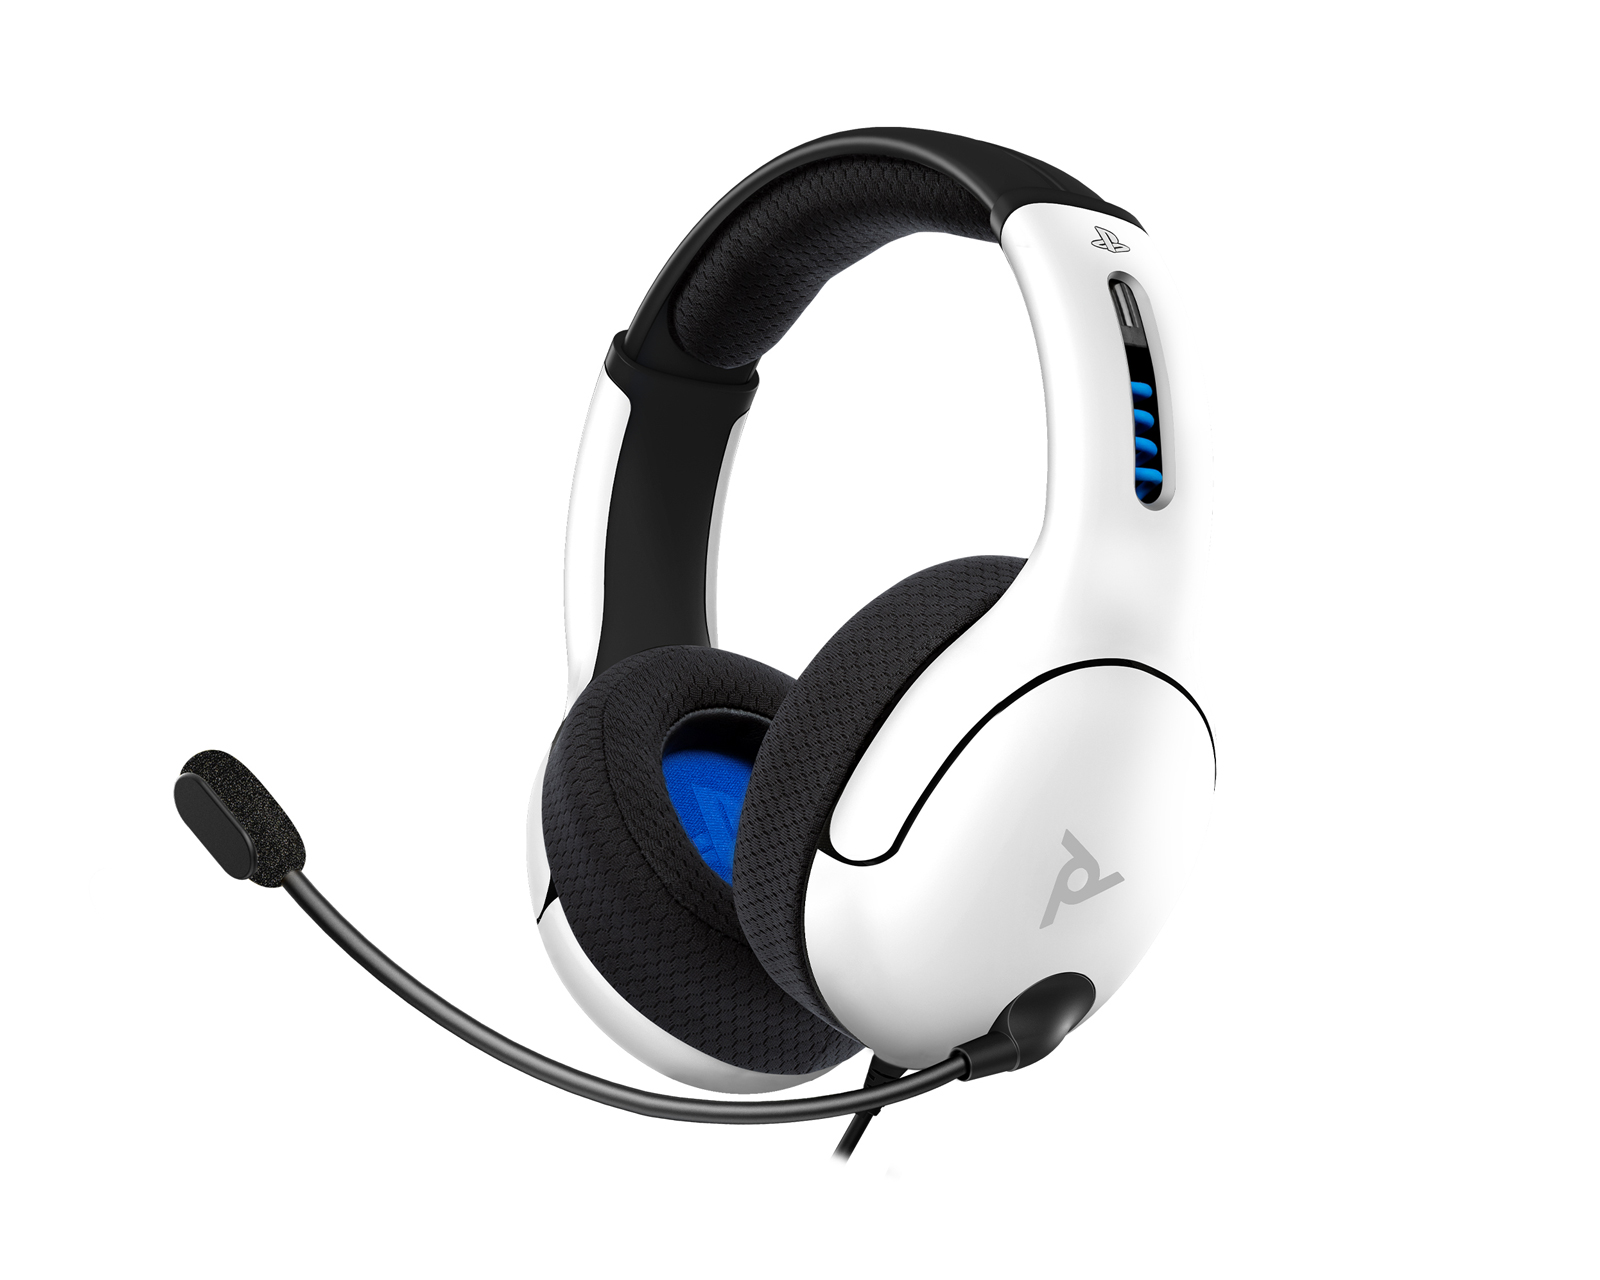  Casque Gaming Avec Micro Pour Playstation 4 - PS4 Slim